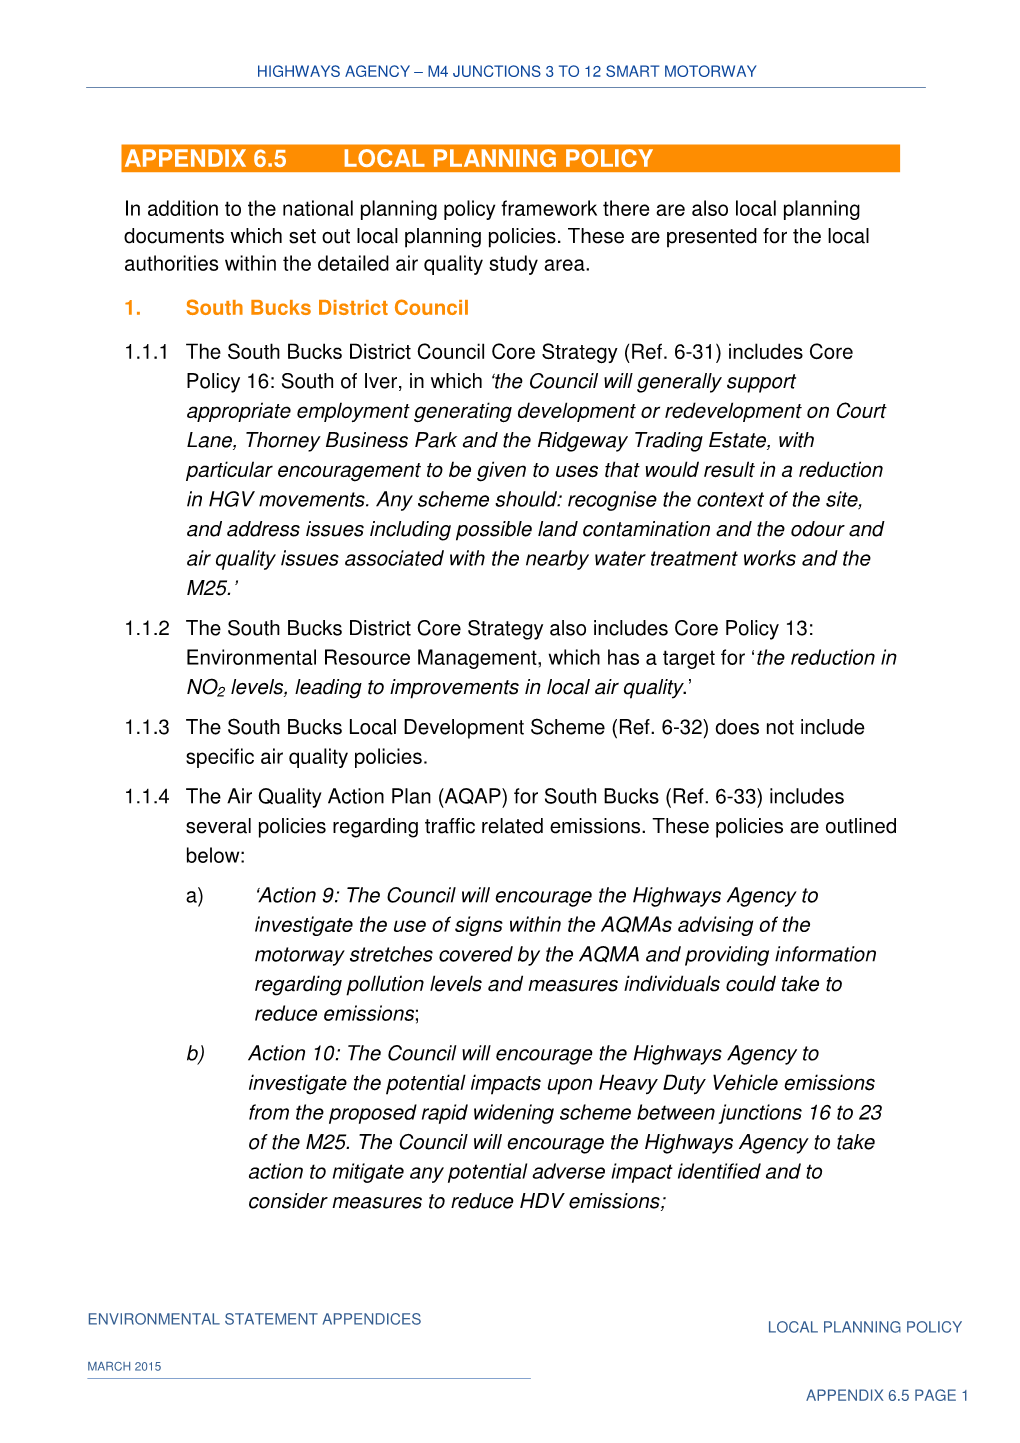 Appendix 6.5 Local Planning Policy